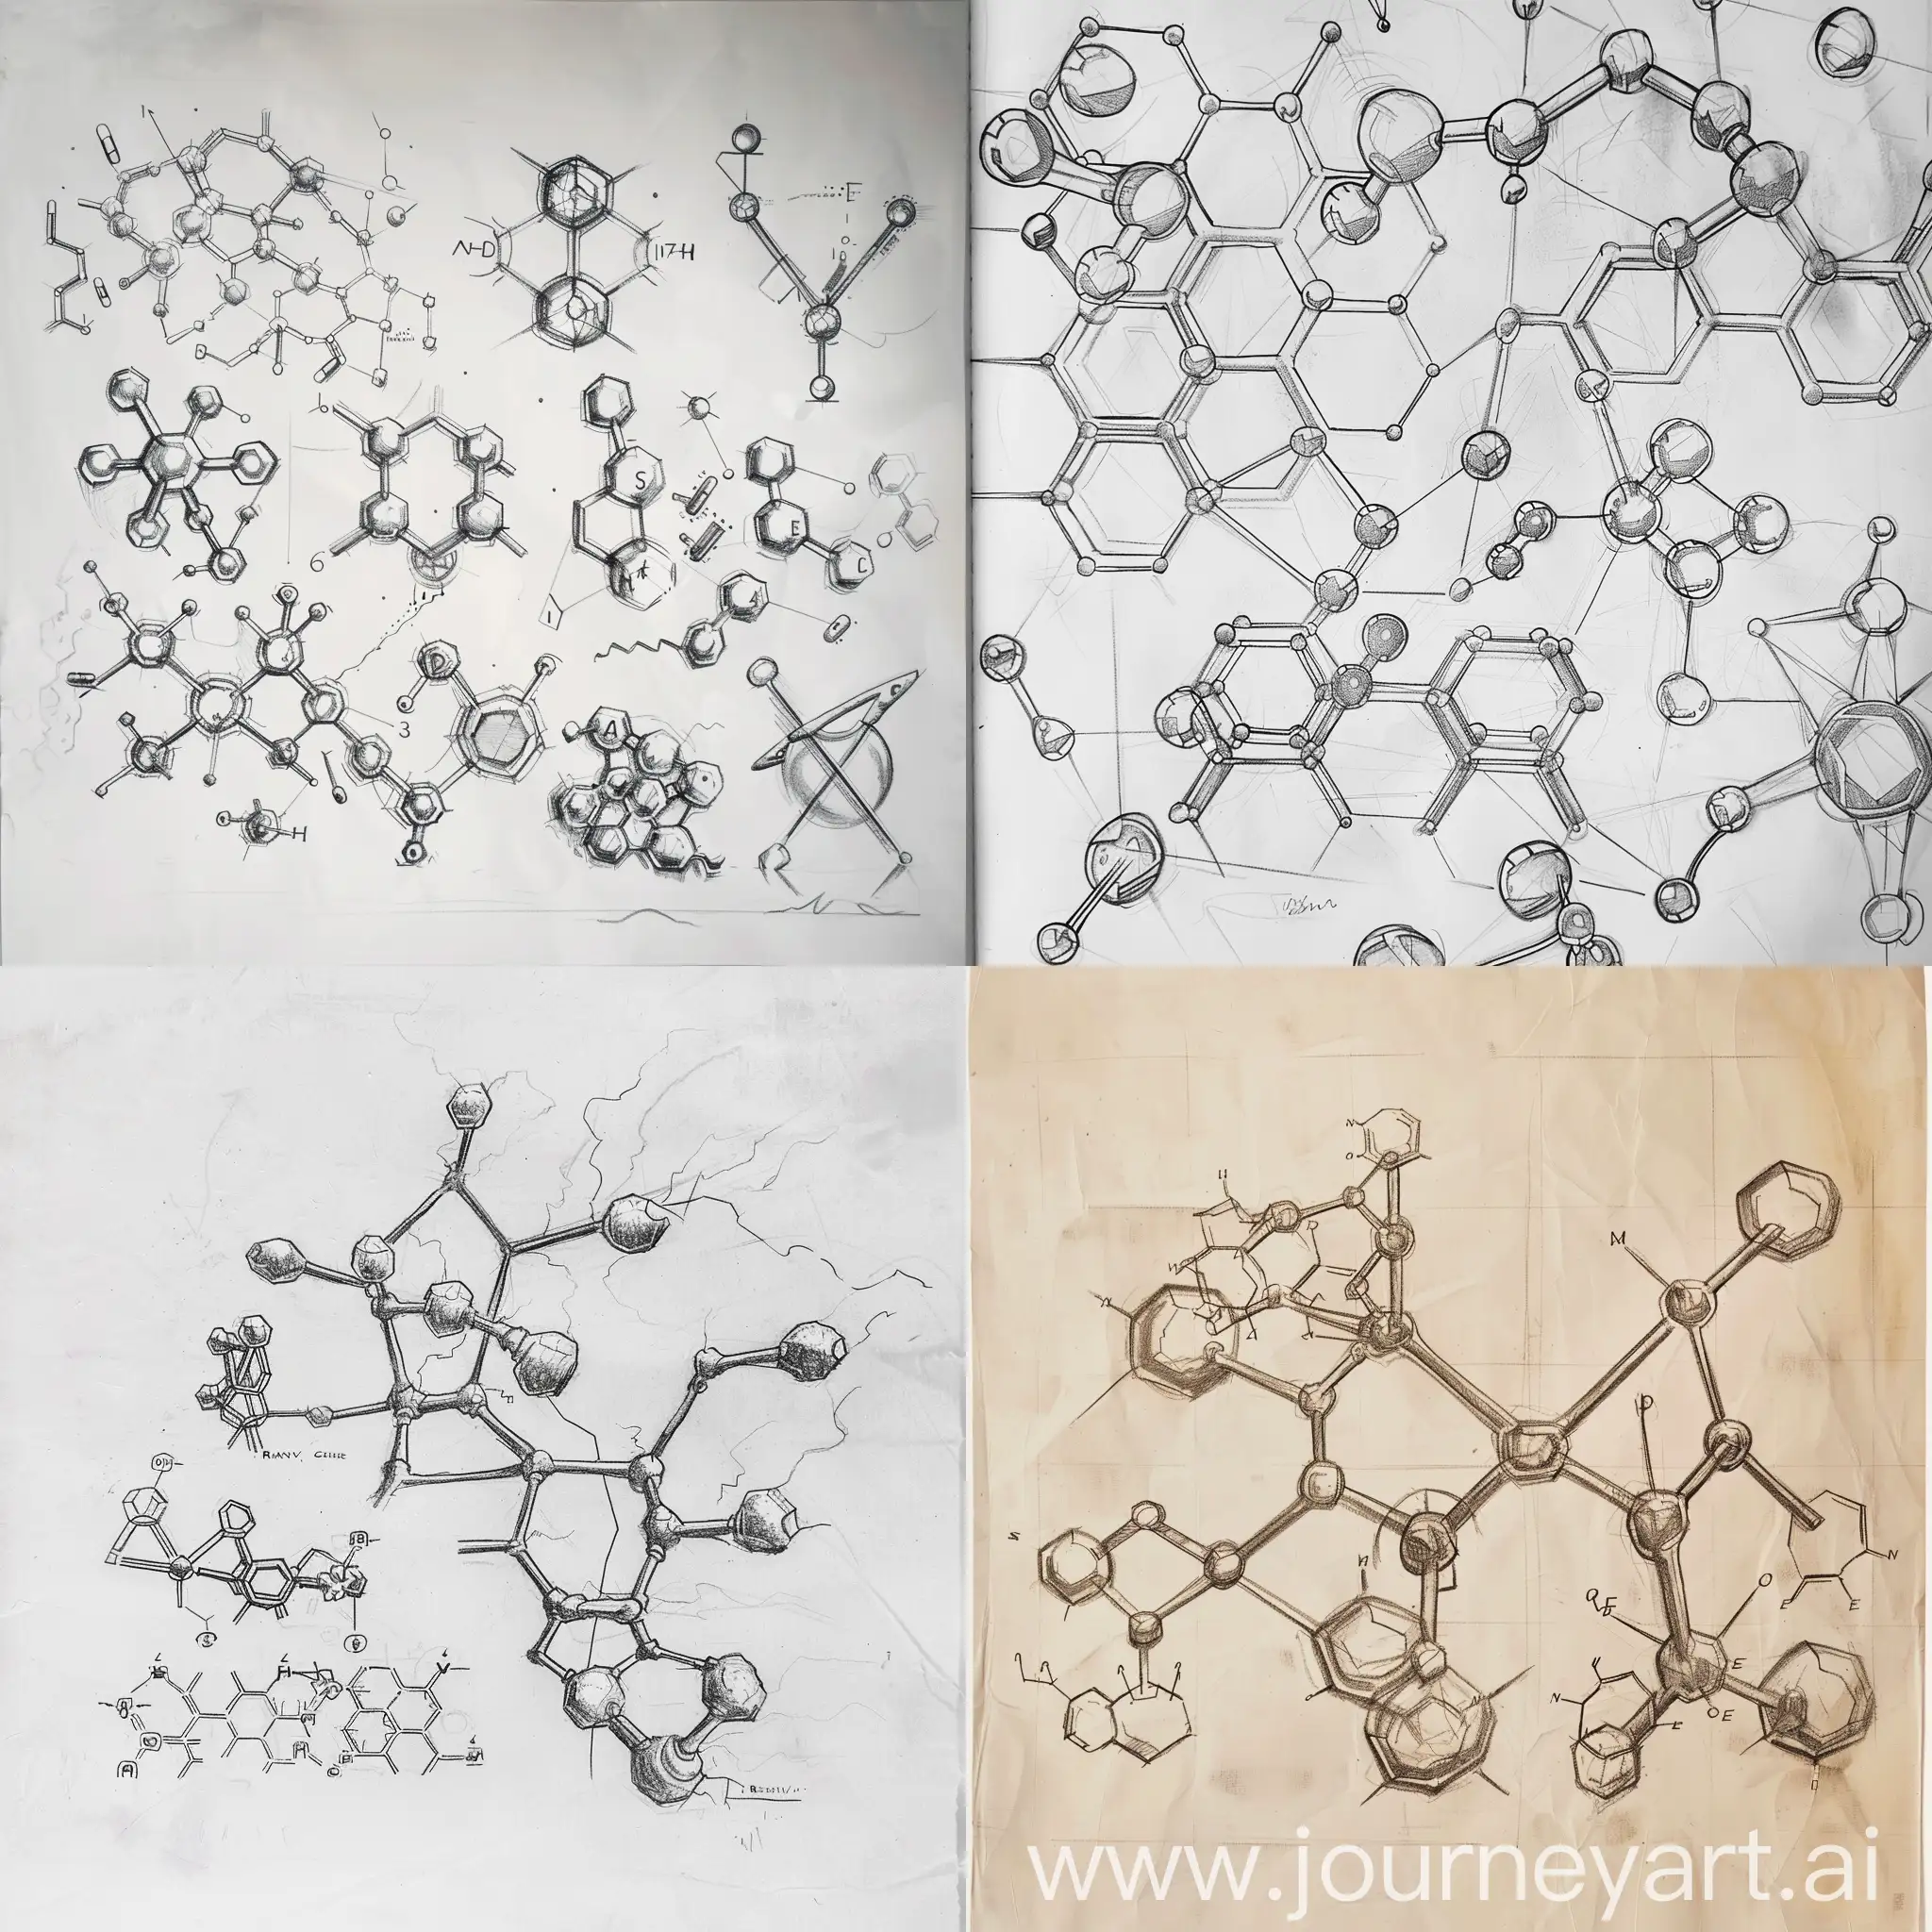 diagrams of chemical structures for anti-aging medicine, pencil sketch